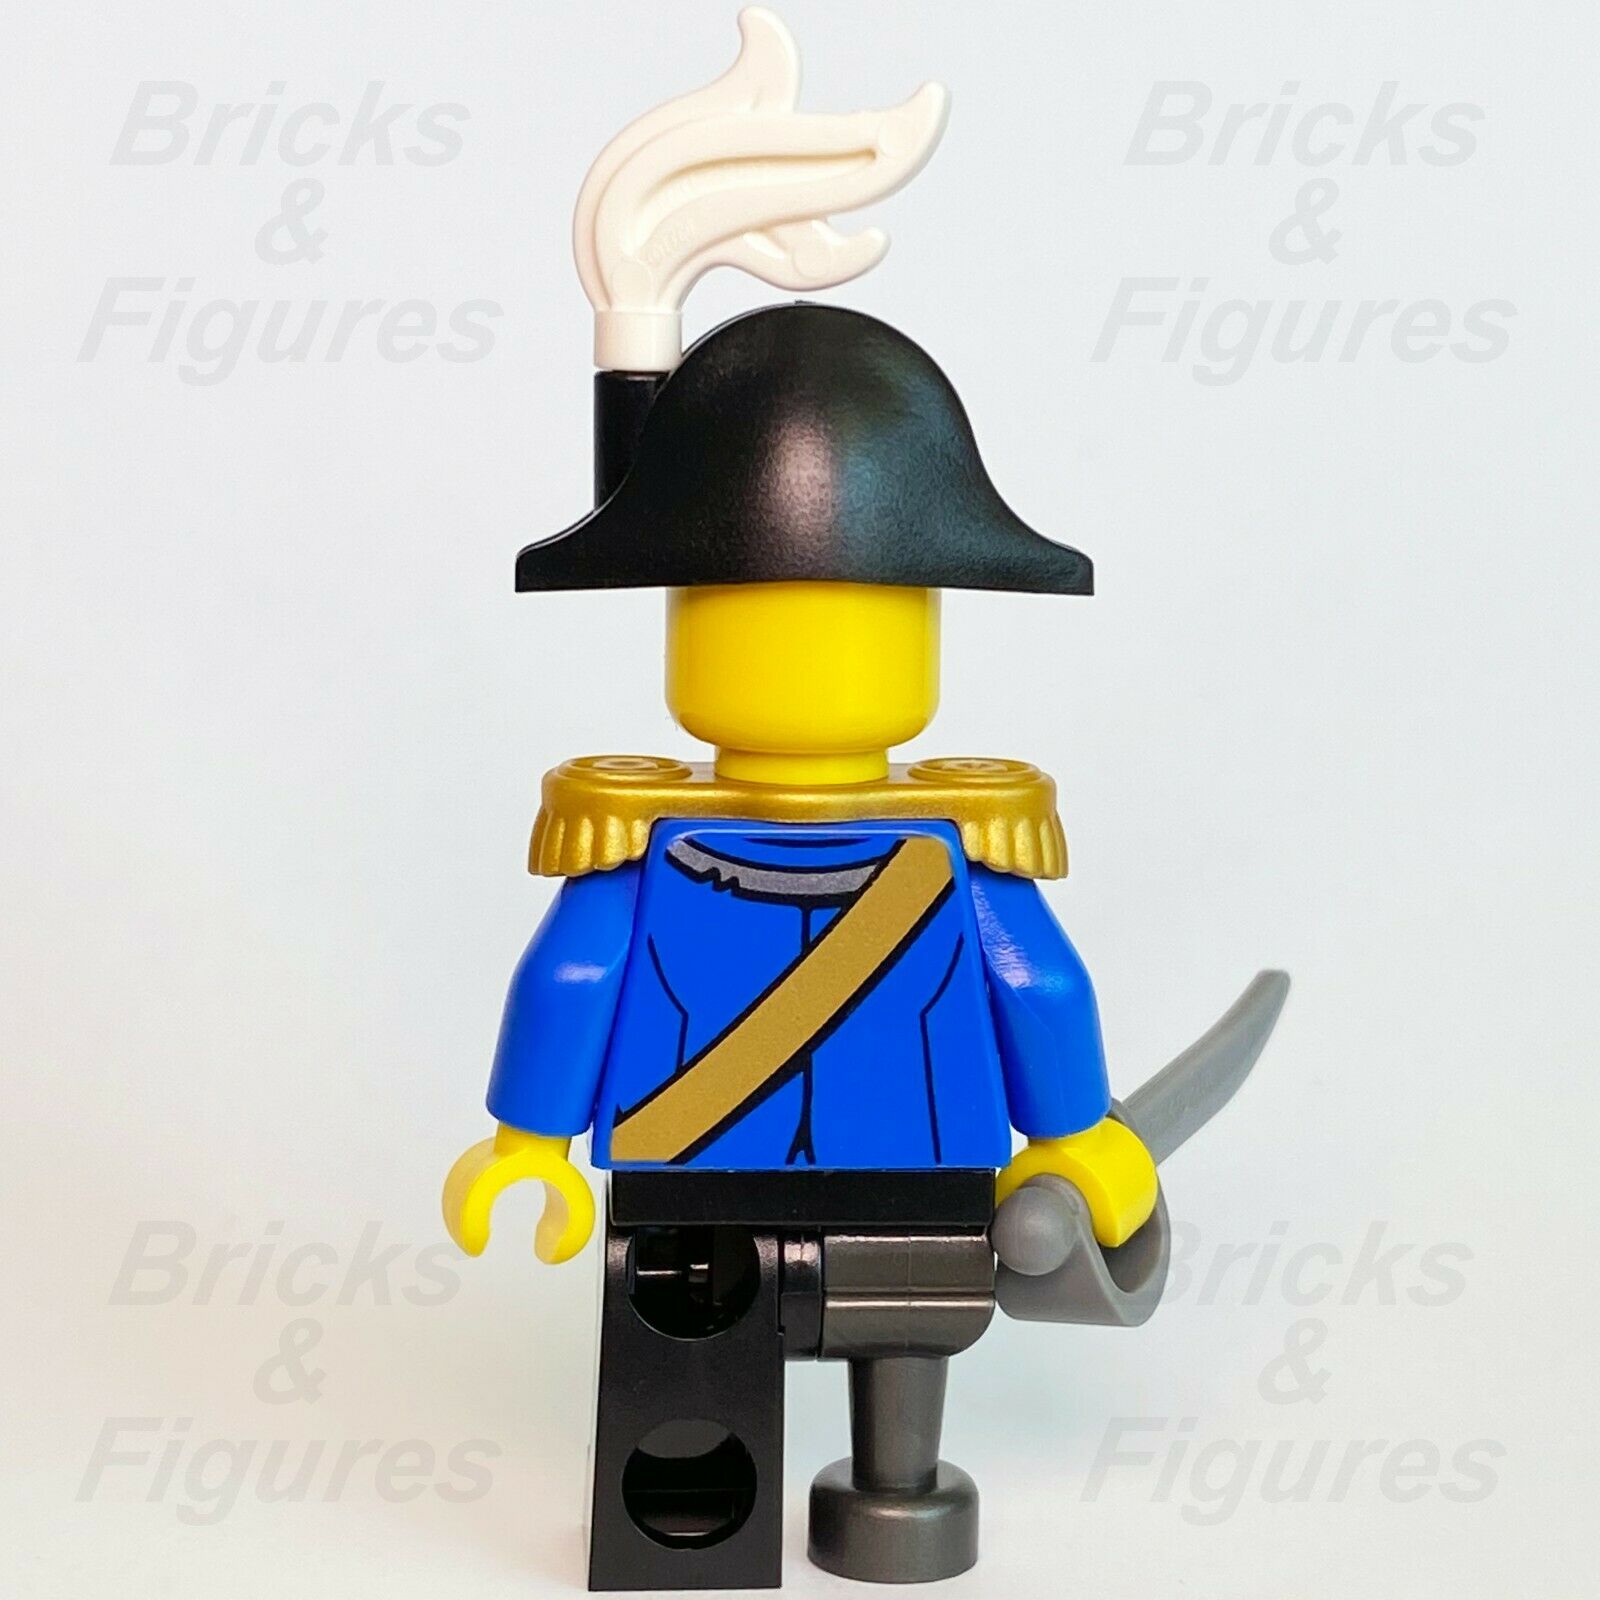 New Creator LEGO Pirate Captain with Blue Jacket & Sword Minifigure 31